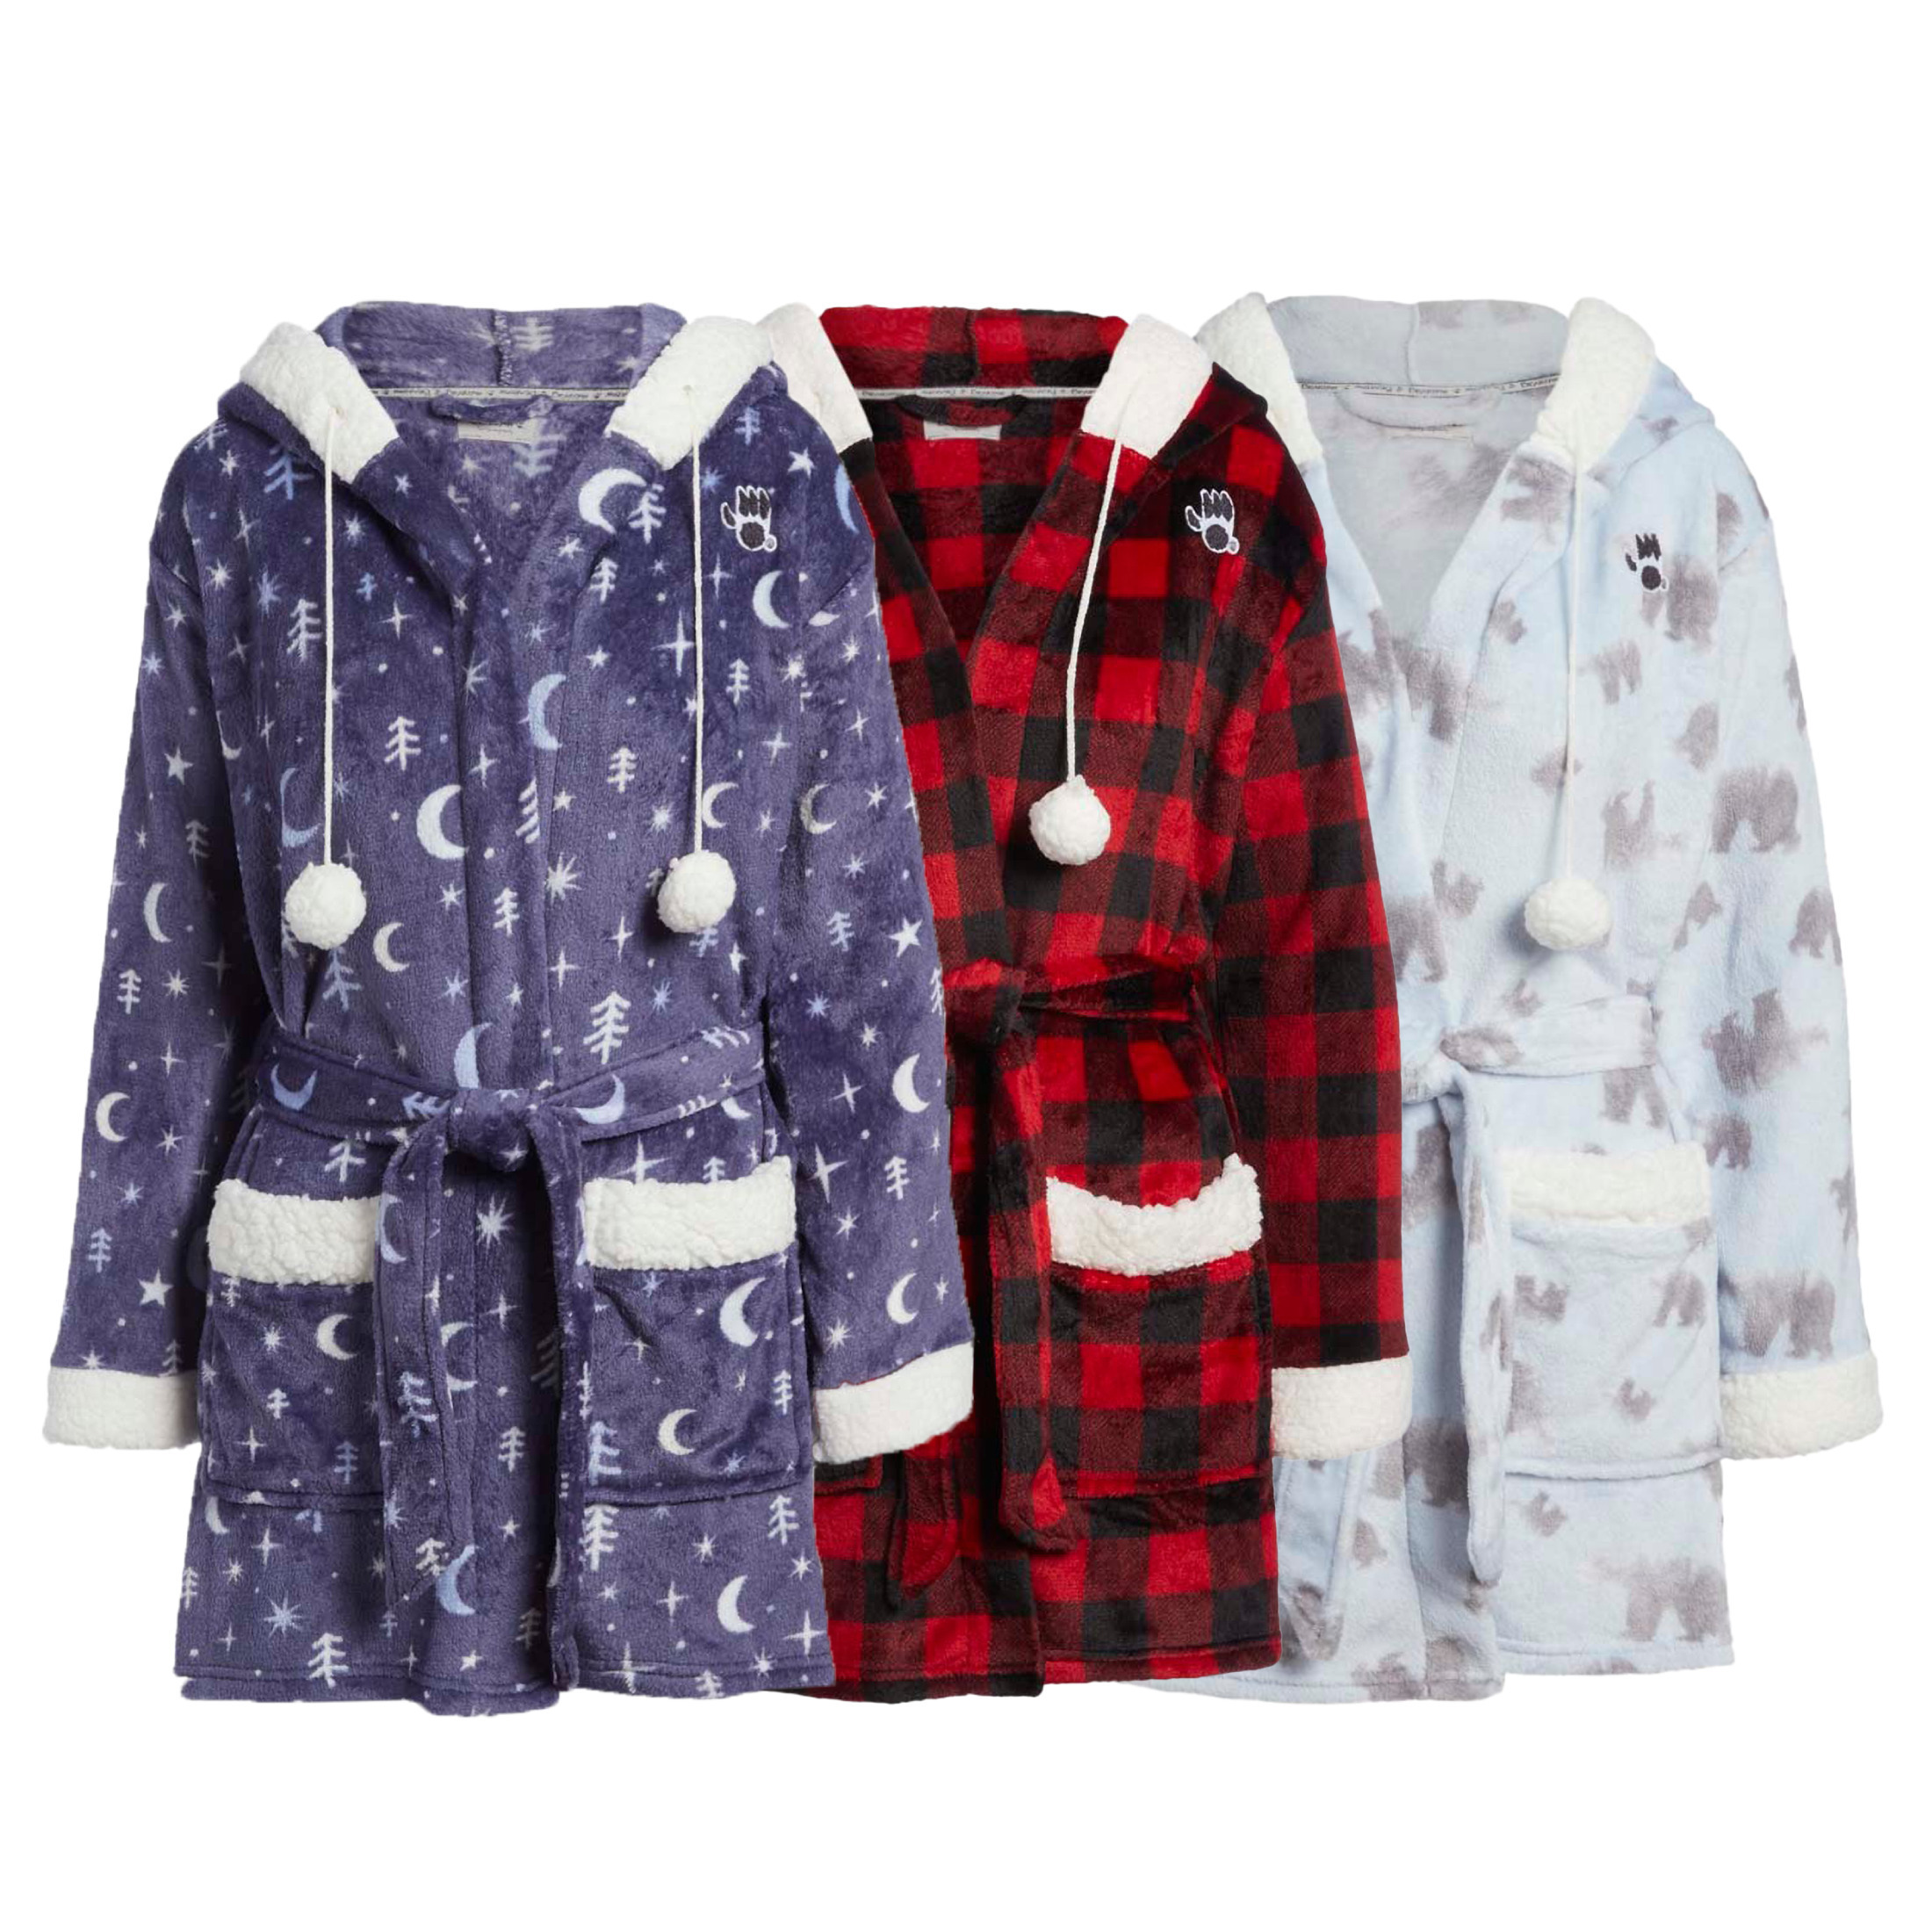 2-Pack: Women's Soft Plush Sherpa Lined Trim Print Robe With Pockets And Hood - Small